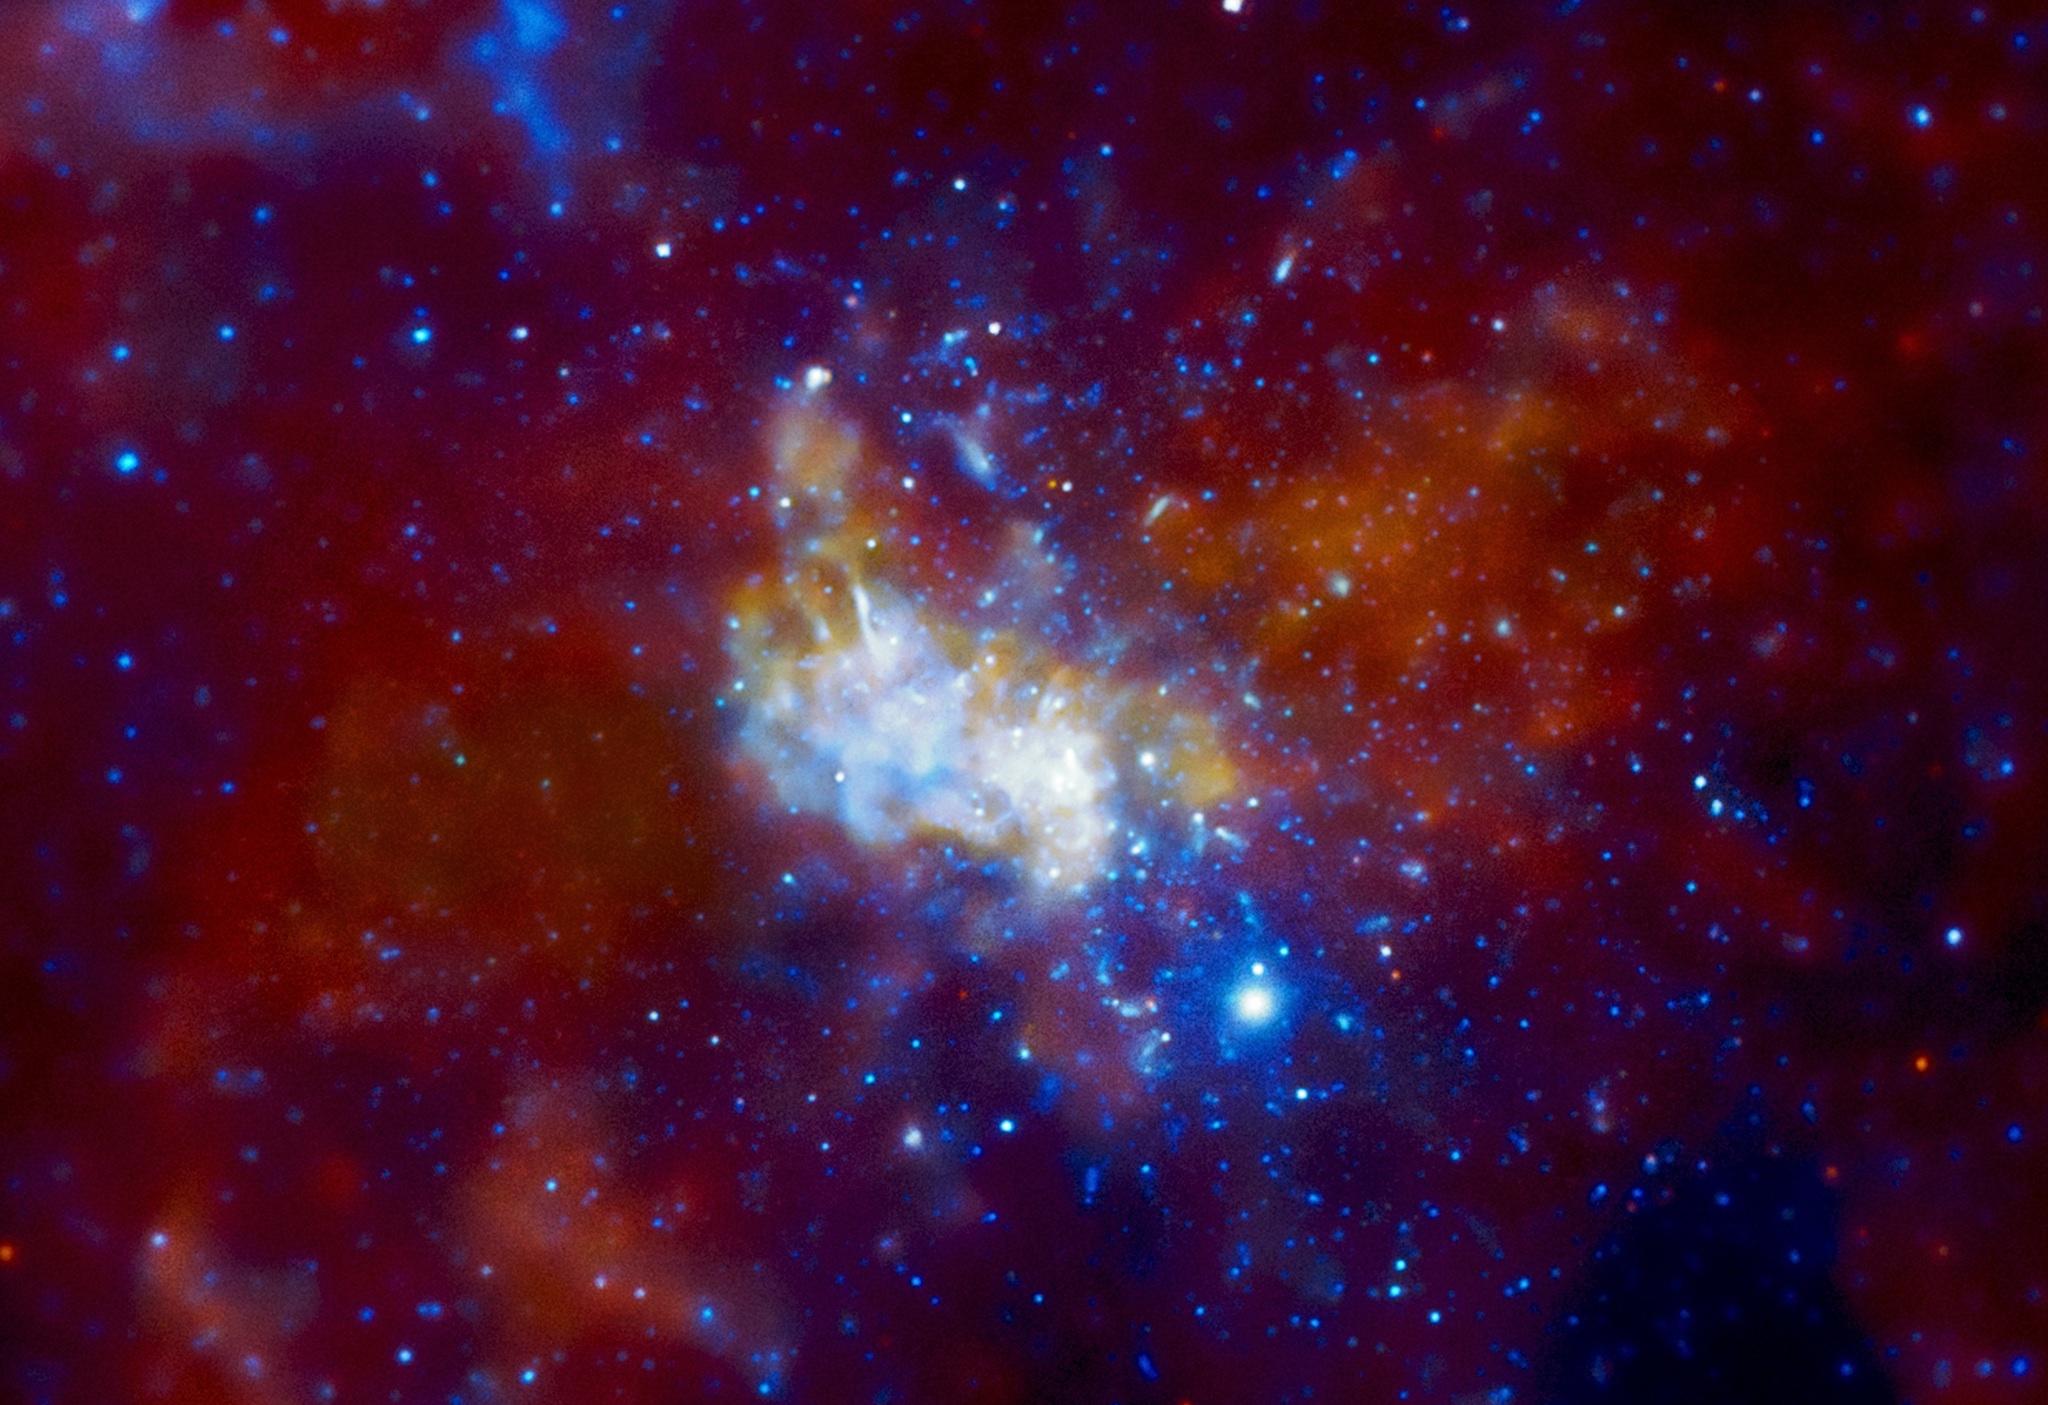 An image from NASA's Chandra X-ray Observatory our galaxy's centre, with its supermassive black hole at the middle